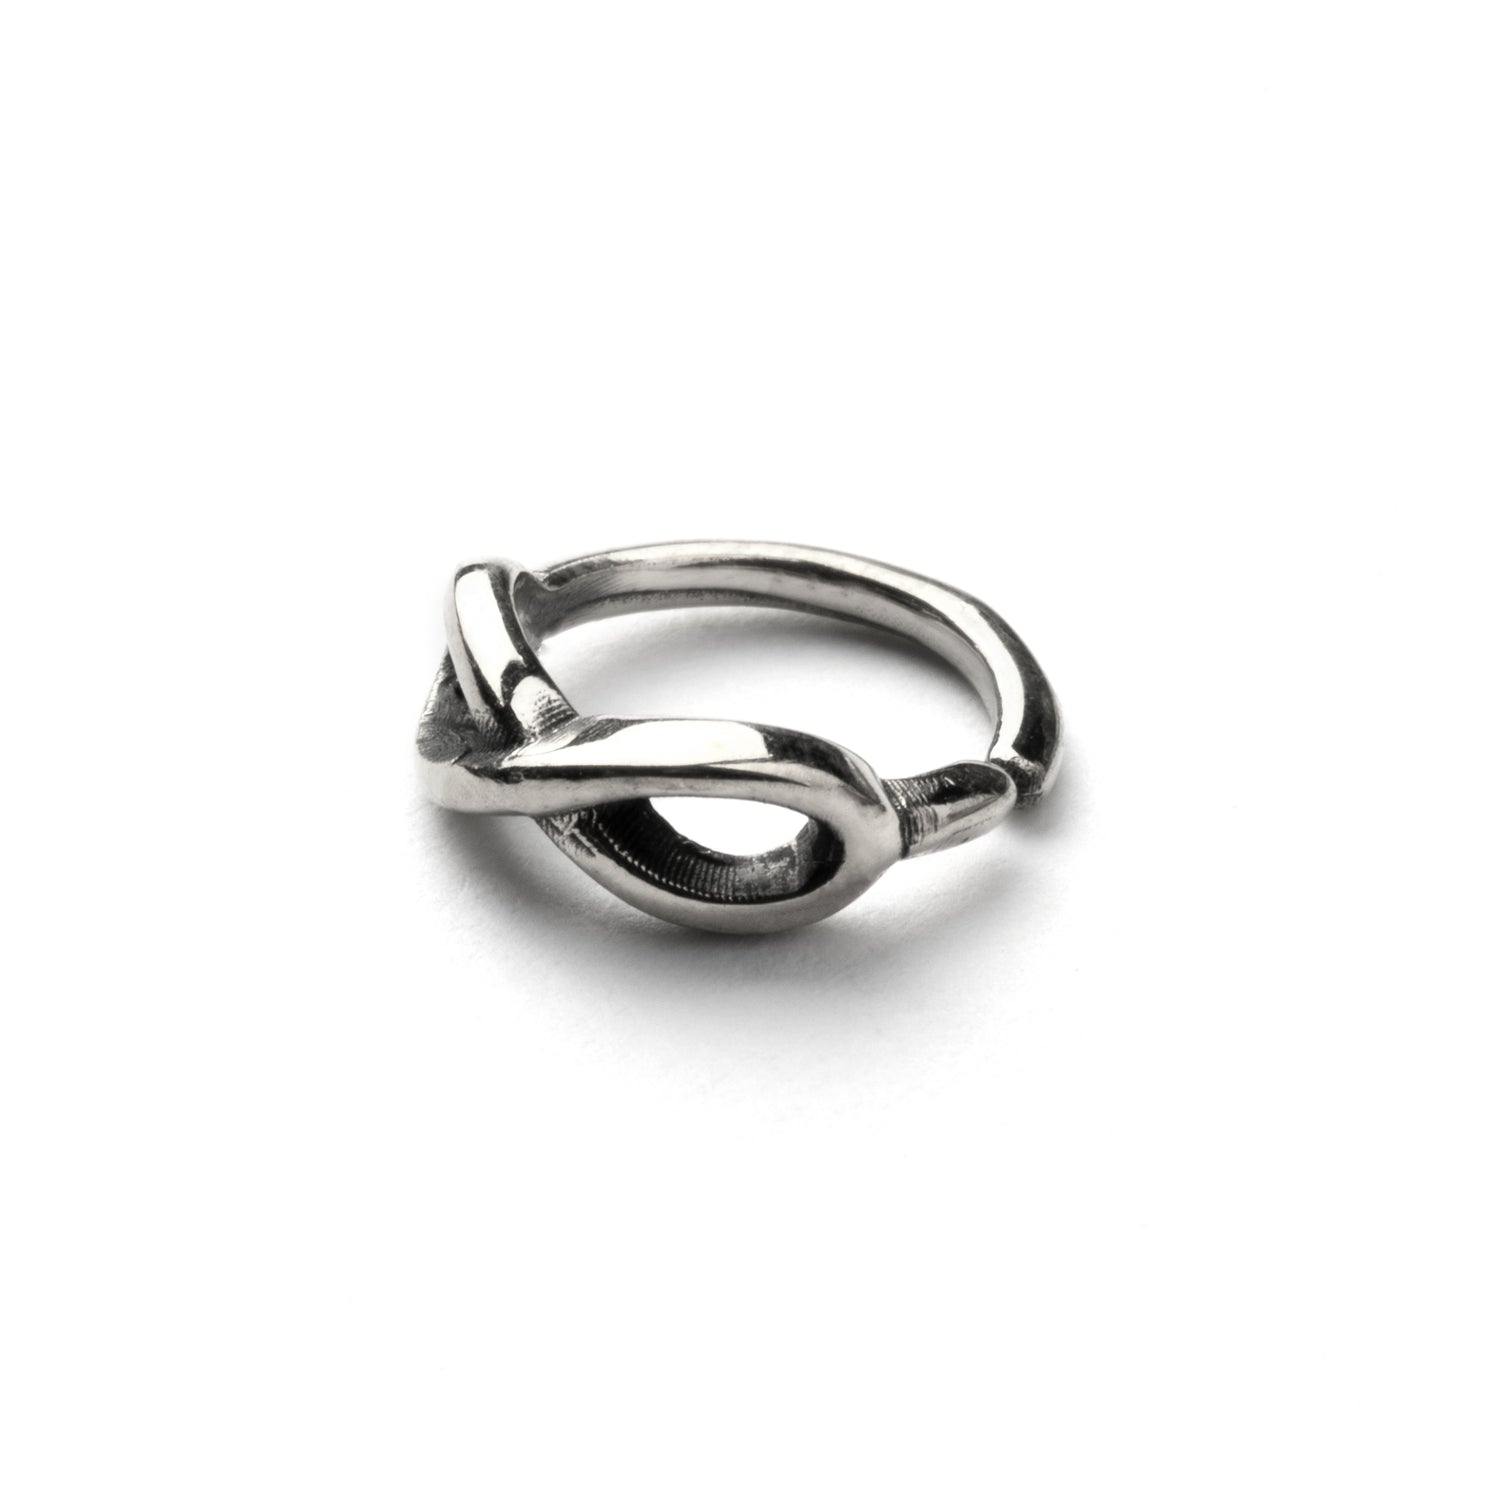 Silver Infinity piercing nose ring right side view